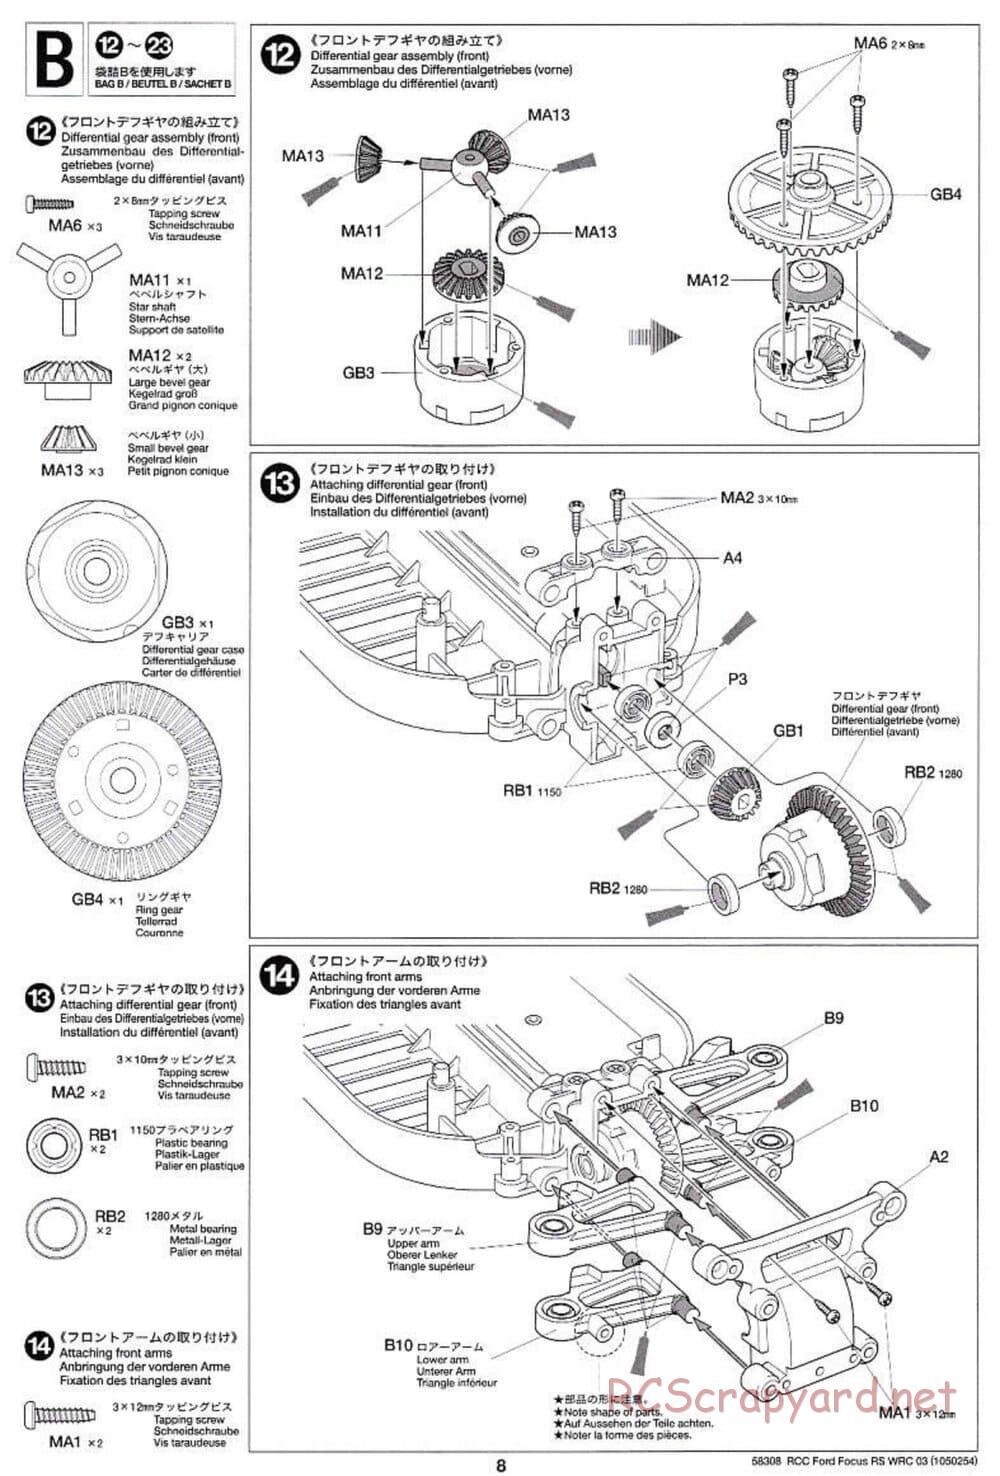 Tamiya - Ford Focus RS WRC 03 - TT-01 Chassis - Manual - Page 8